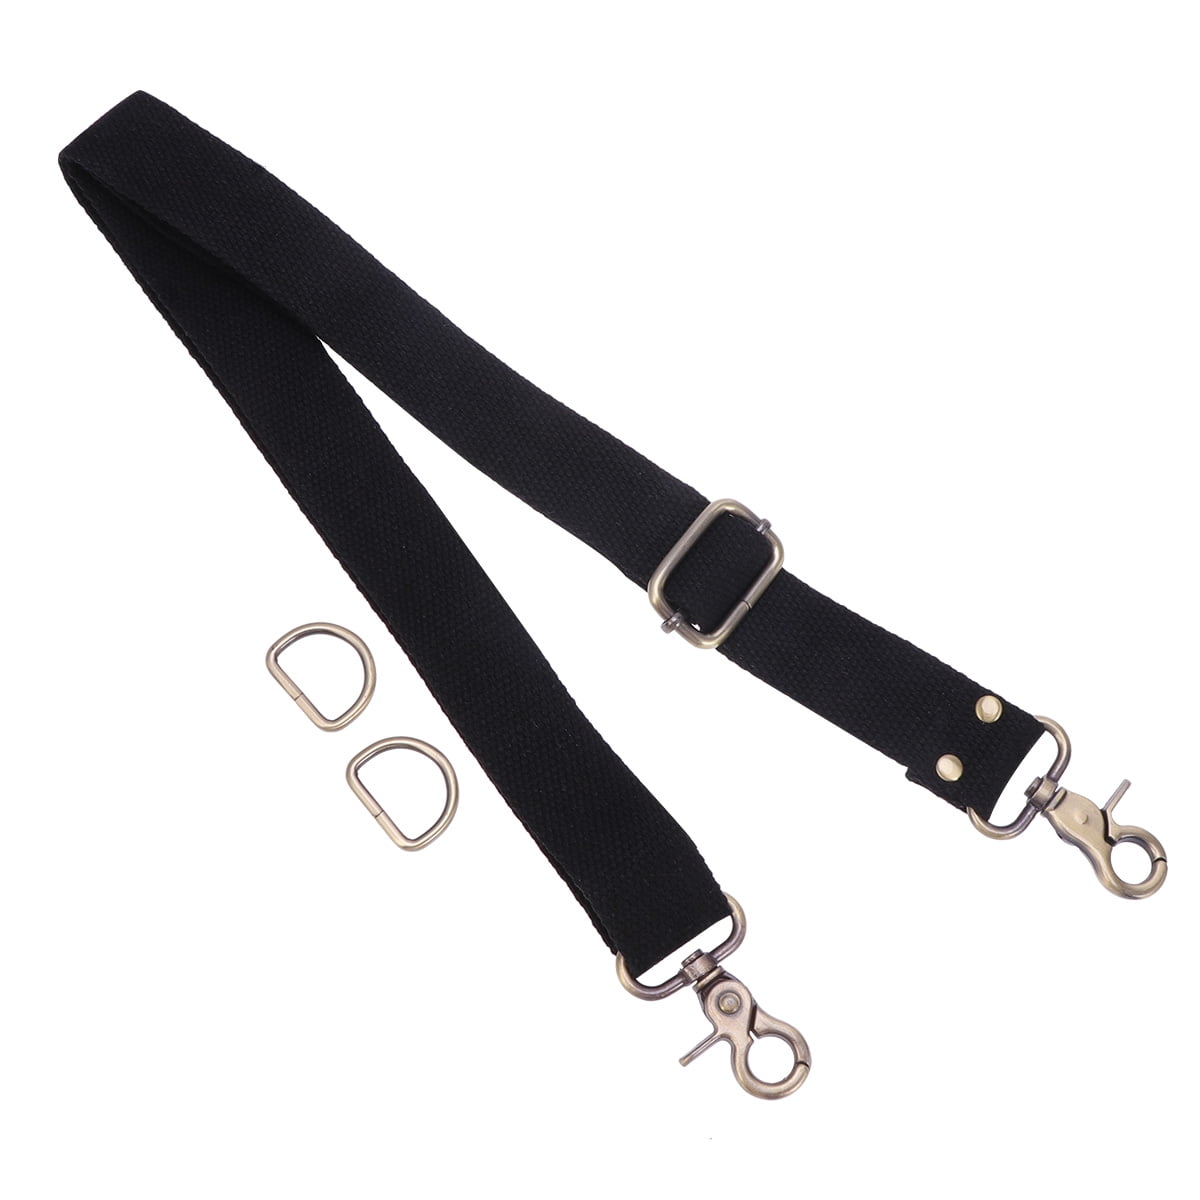 Adjustable Wide Purse Strap Replacement for Crossbodys Handbags & Luggage 